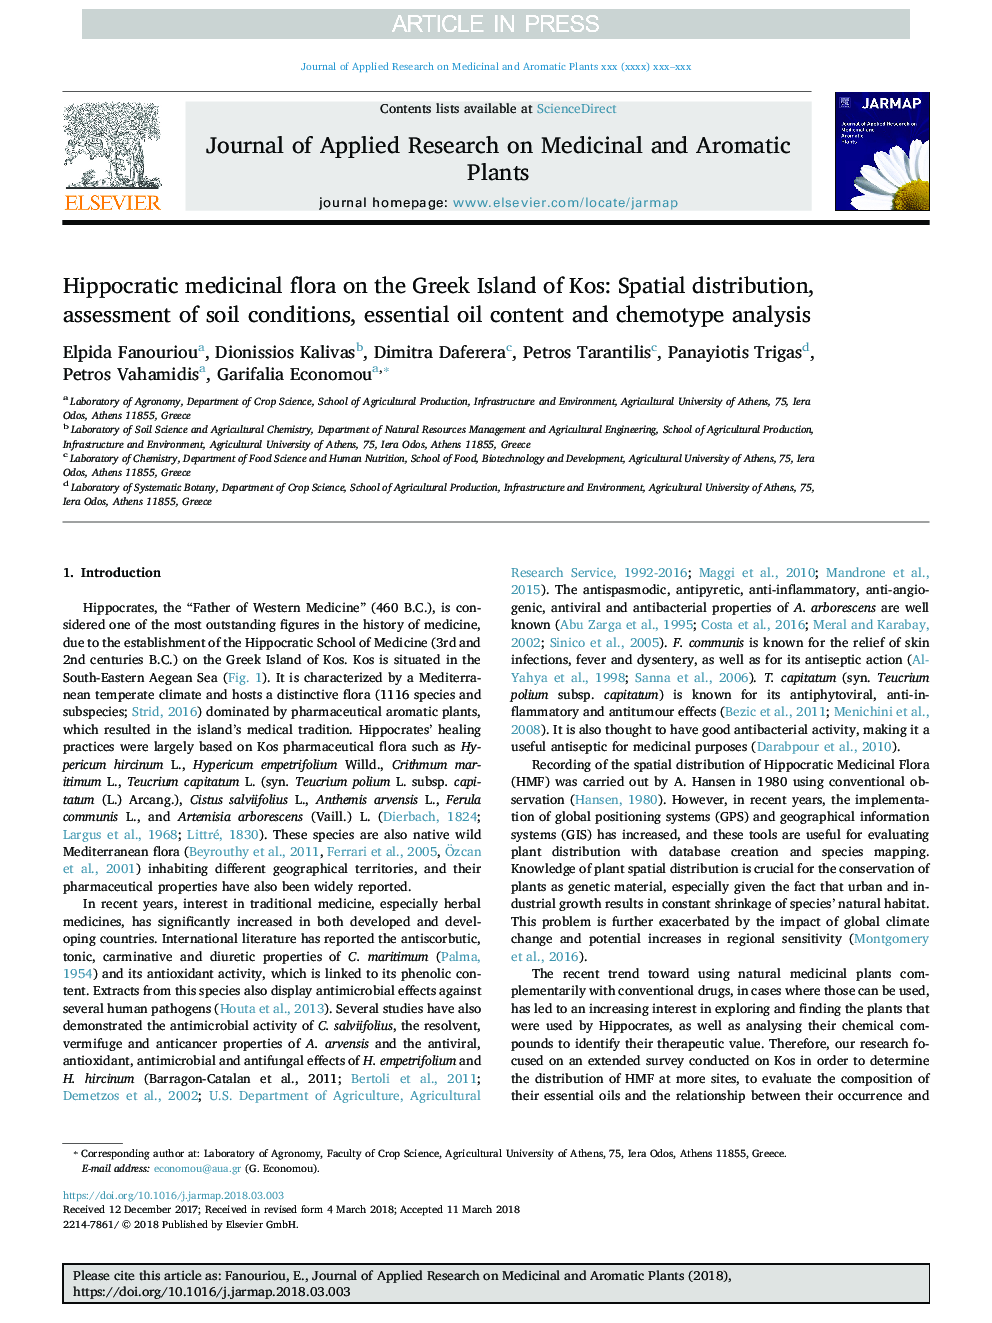 Hippocratic medicinal flora on the Greek Island of Kos: Spatial distribution, assessment of soil conditions, essential oil content and chemotype analysis